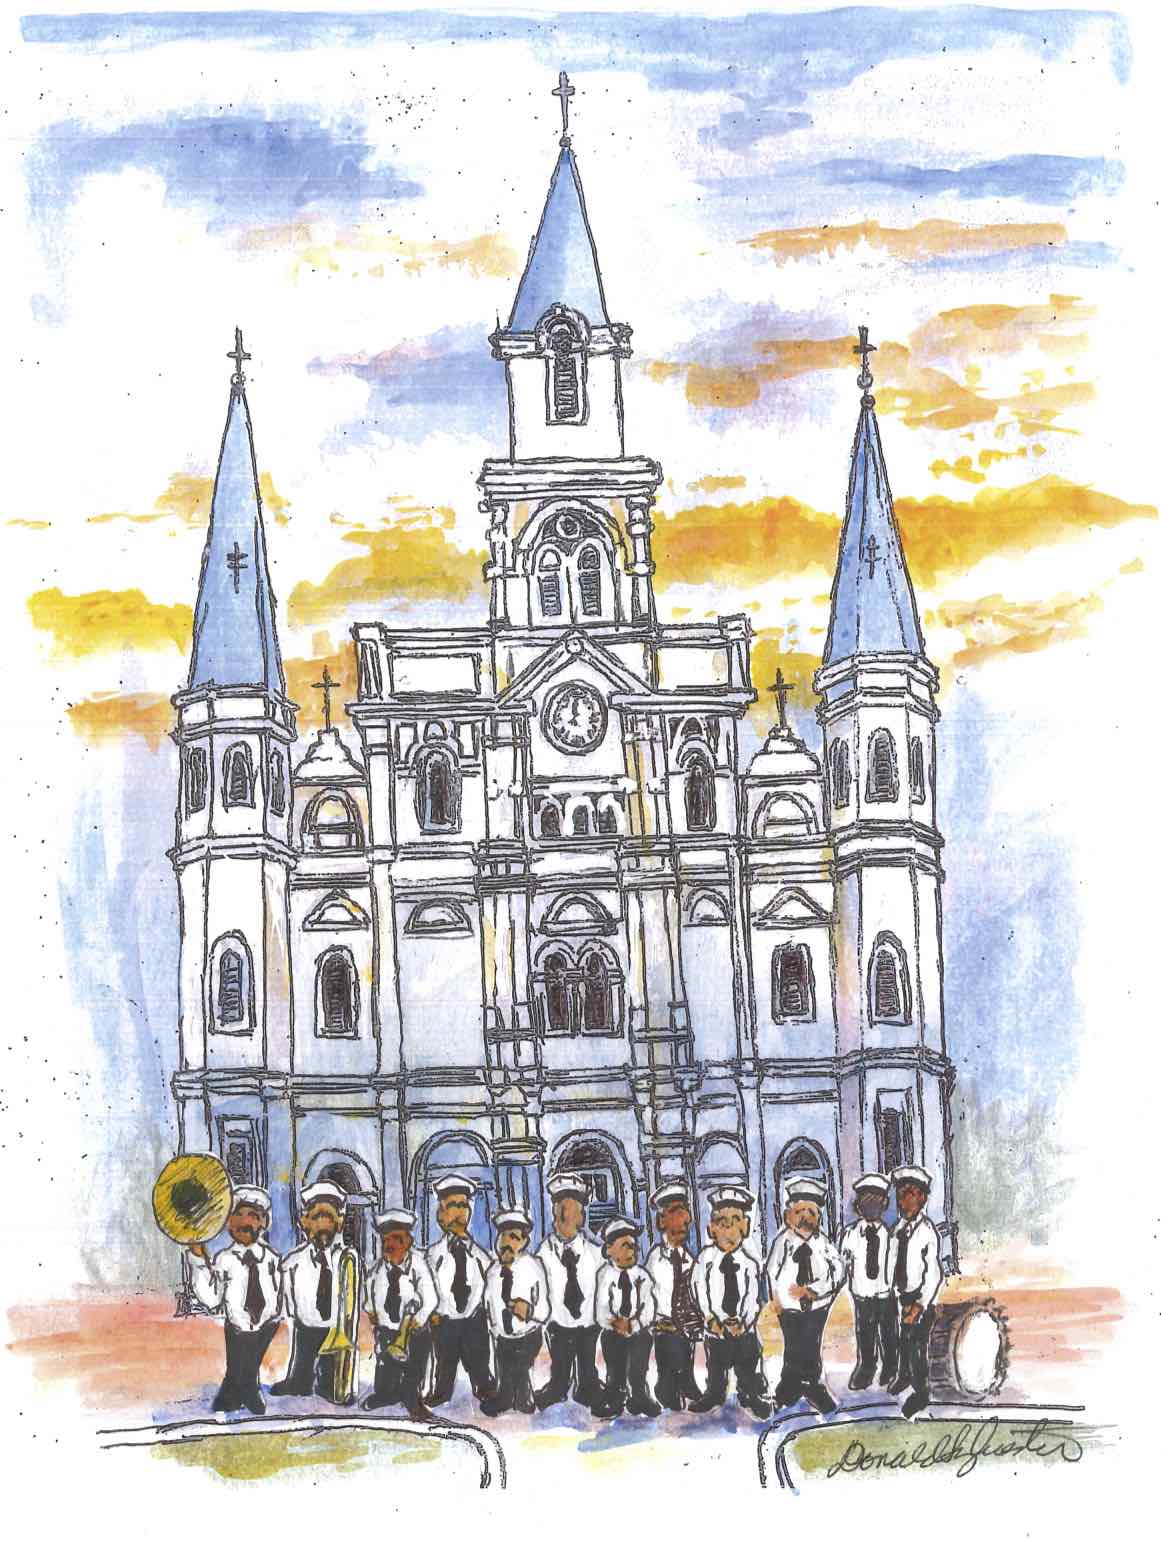 St. Louis Cathedral built in New Orleans with a standing street band in front.  Drawn in ink and watercolored with blue and yellow.